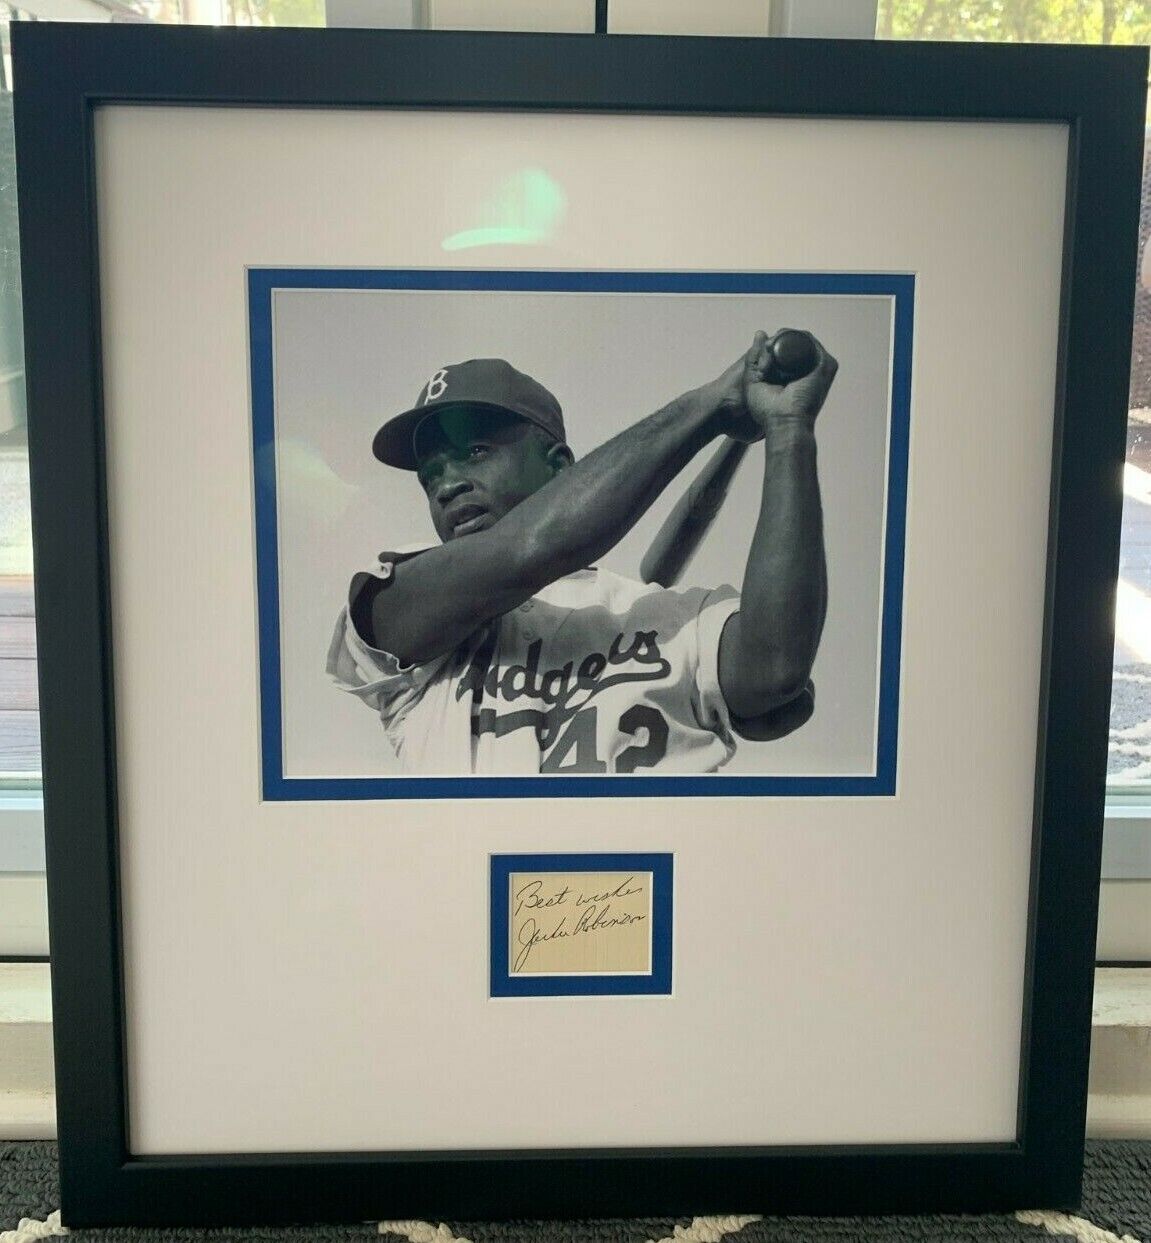 🔥🔥 FRAMED JACKIE ROBINSON SIGNED AUTOGRAPH CUT FULL JSA LETTER OF AUTHENTICITY